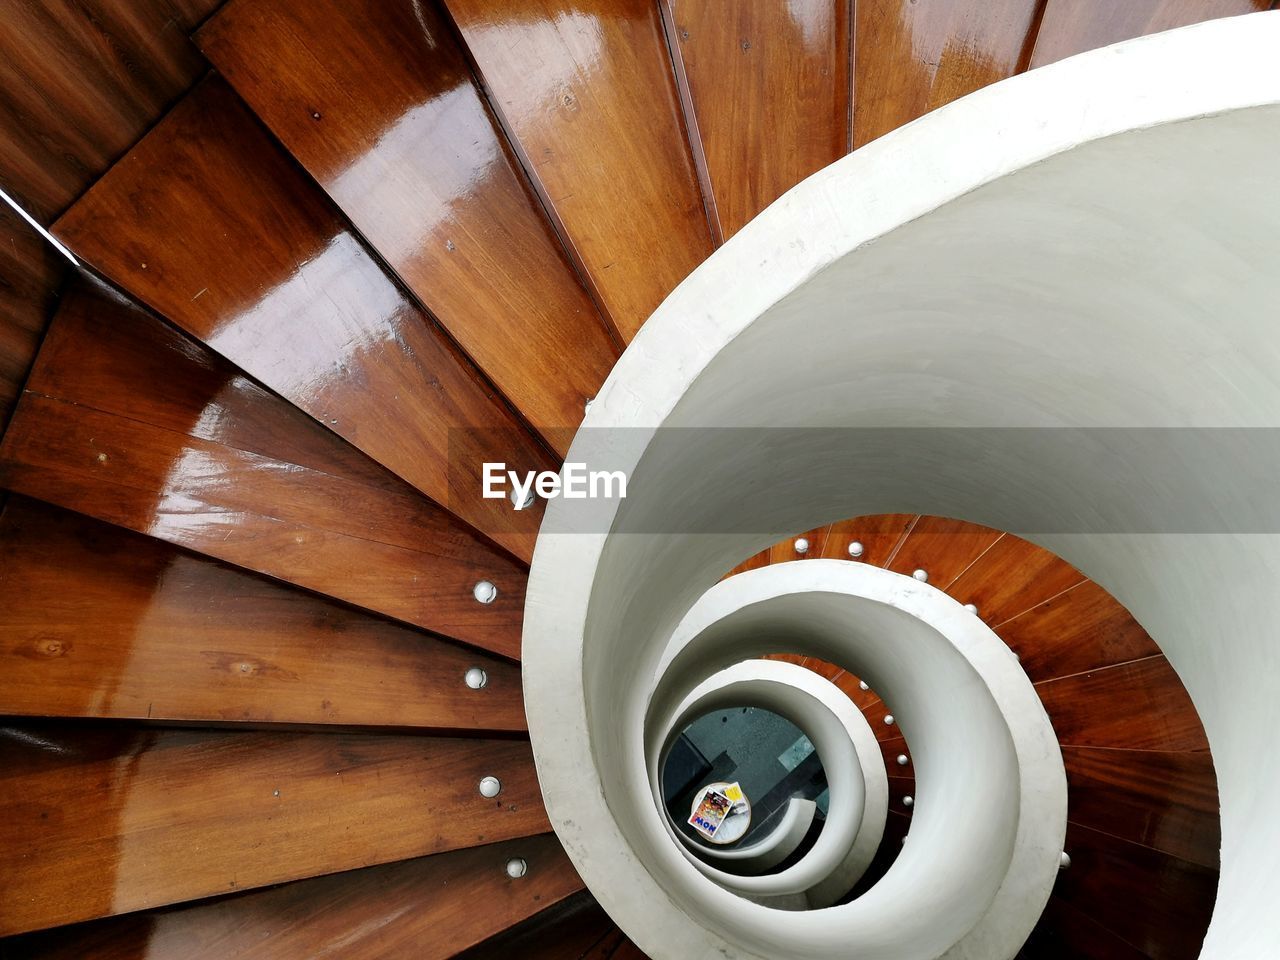 Directly below shot of wooden spiral staircase